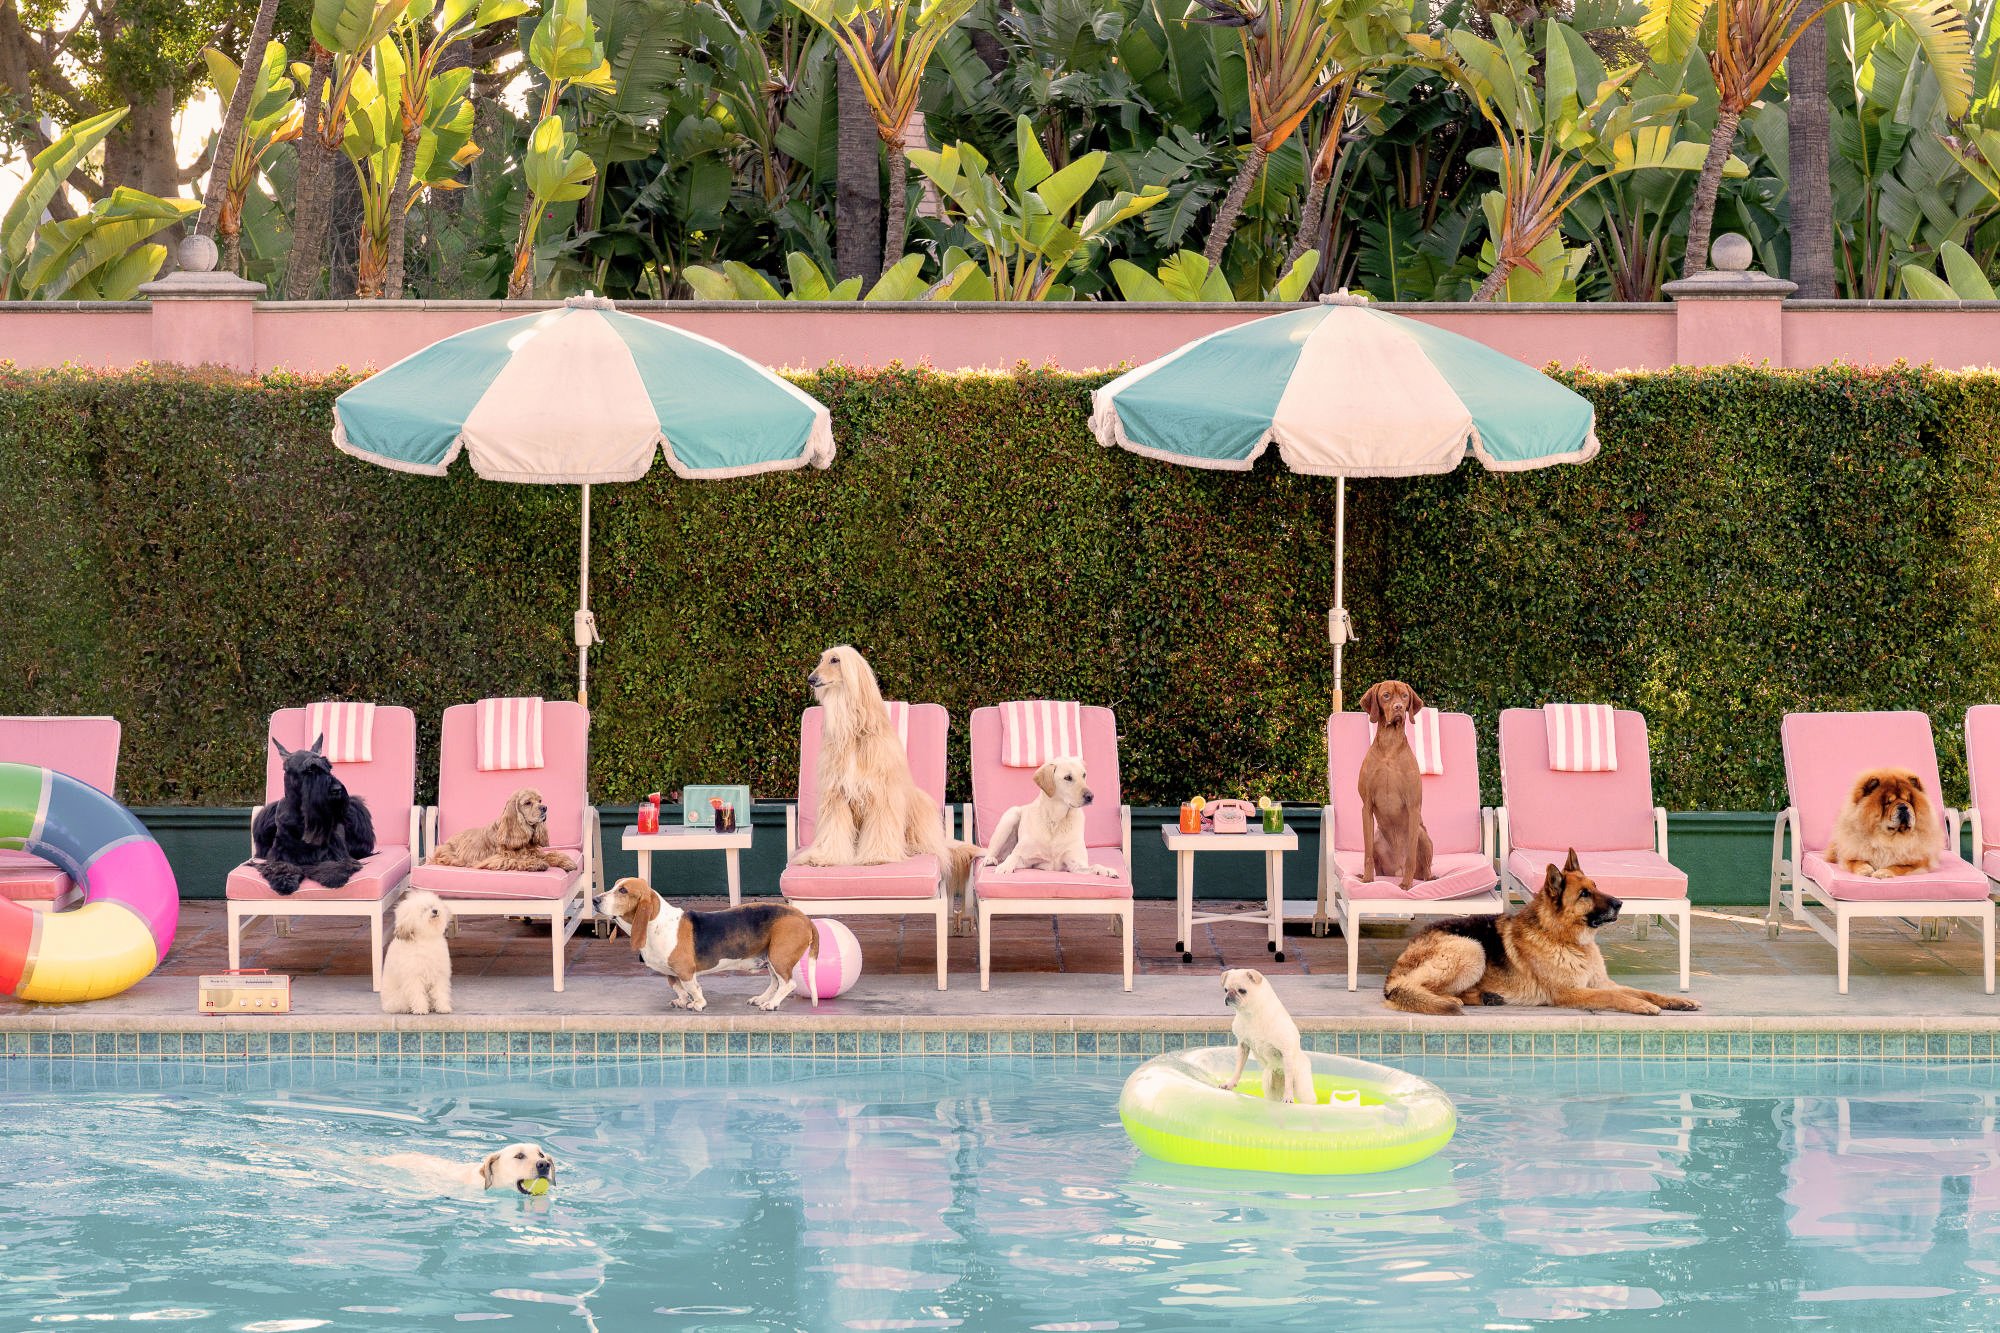 Pool Day, The Beverly Hills Hotel.jpg